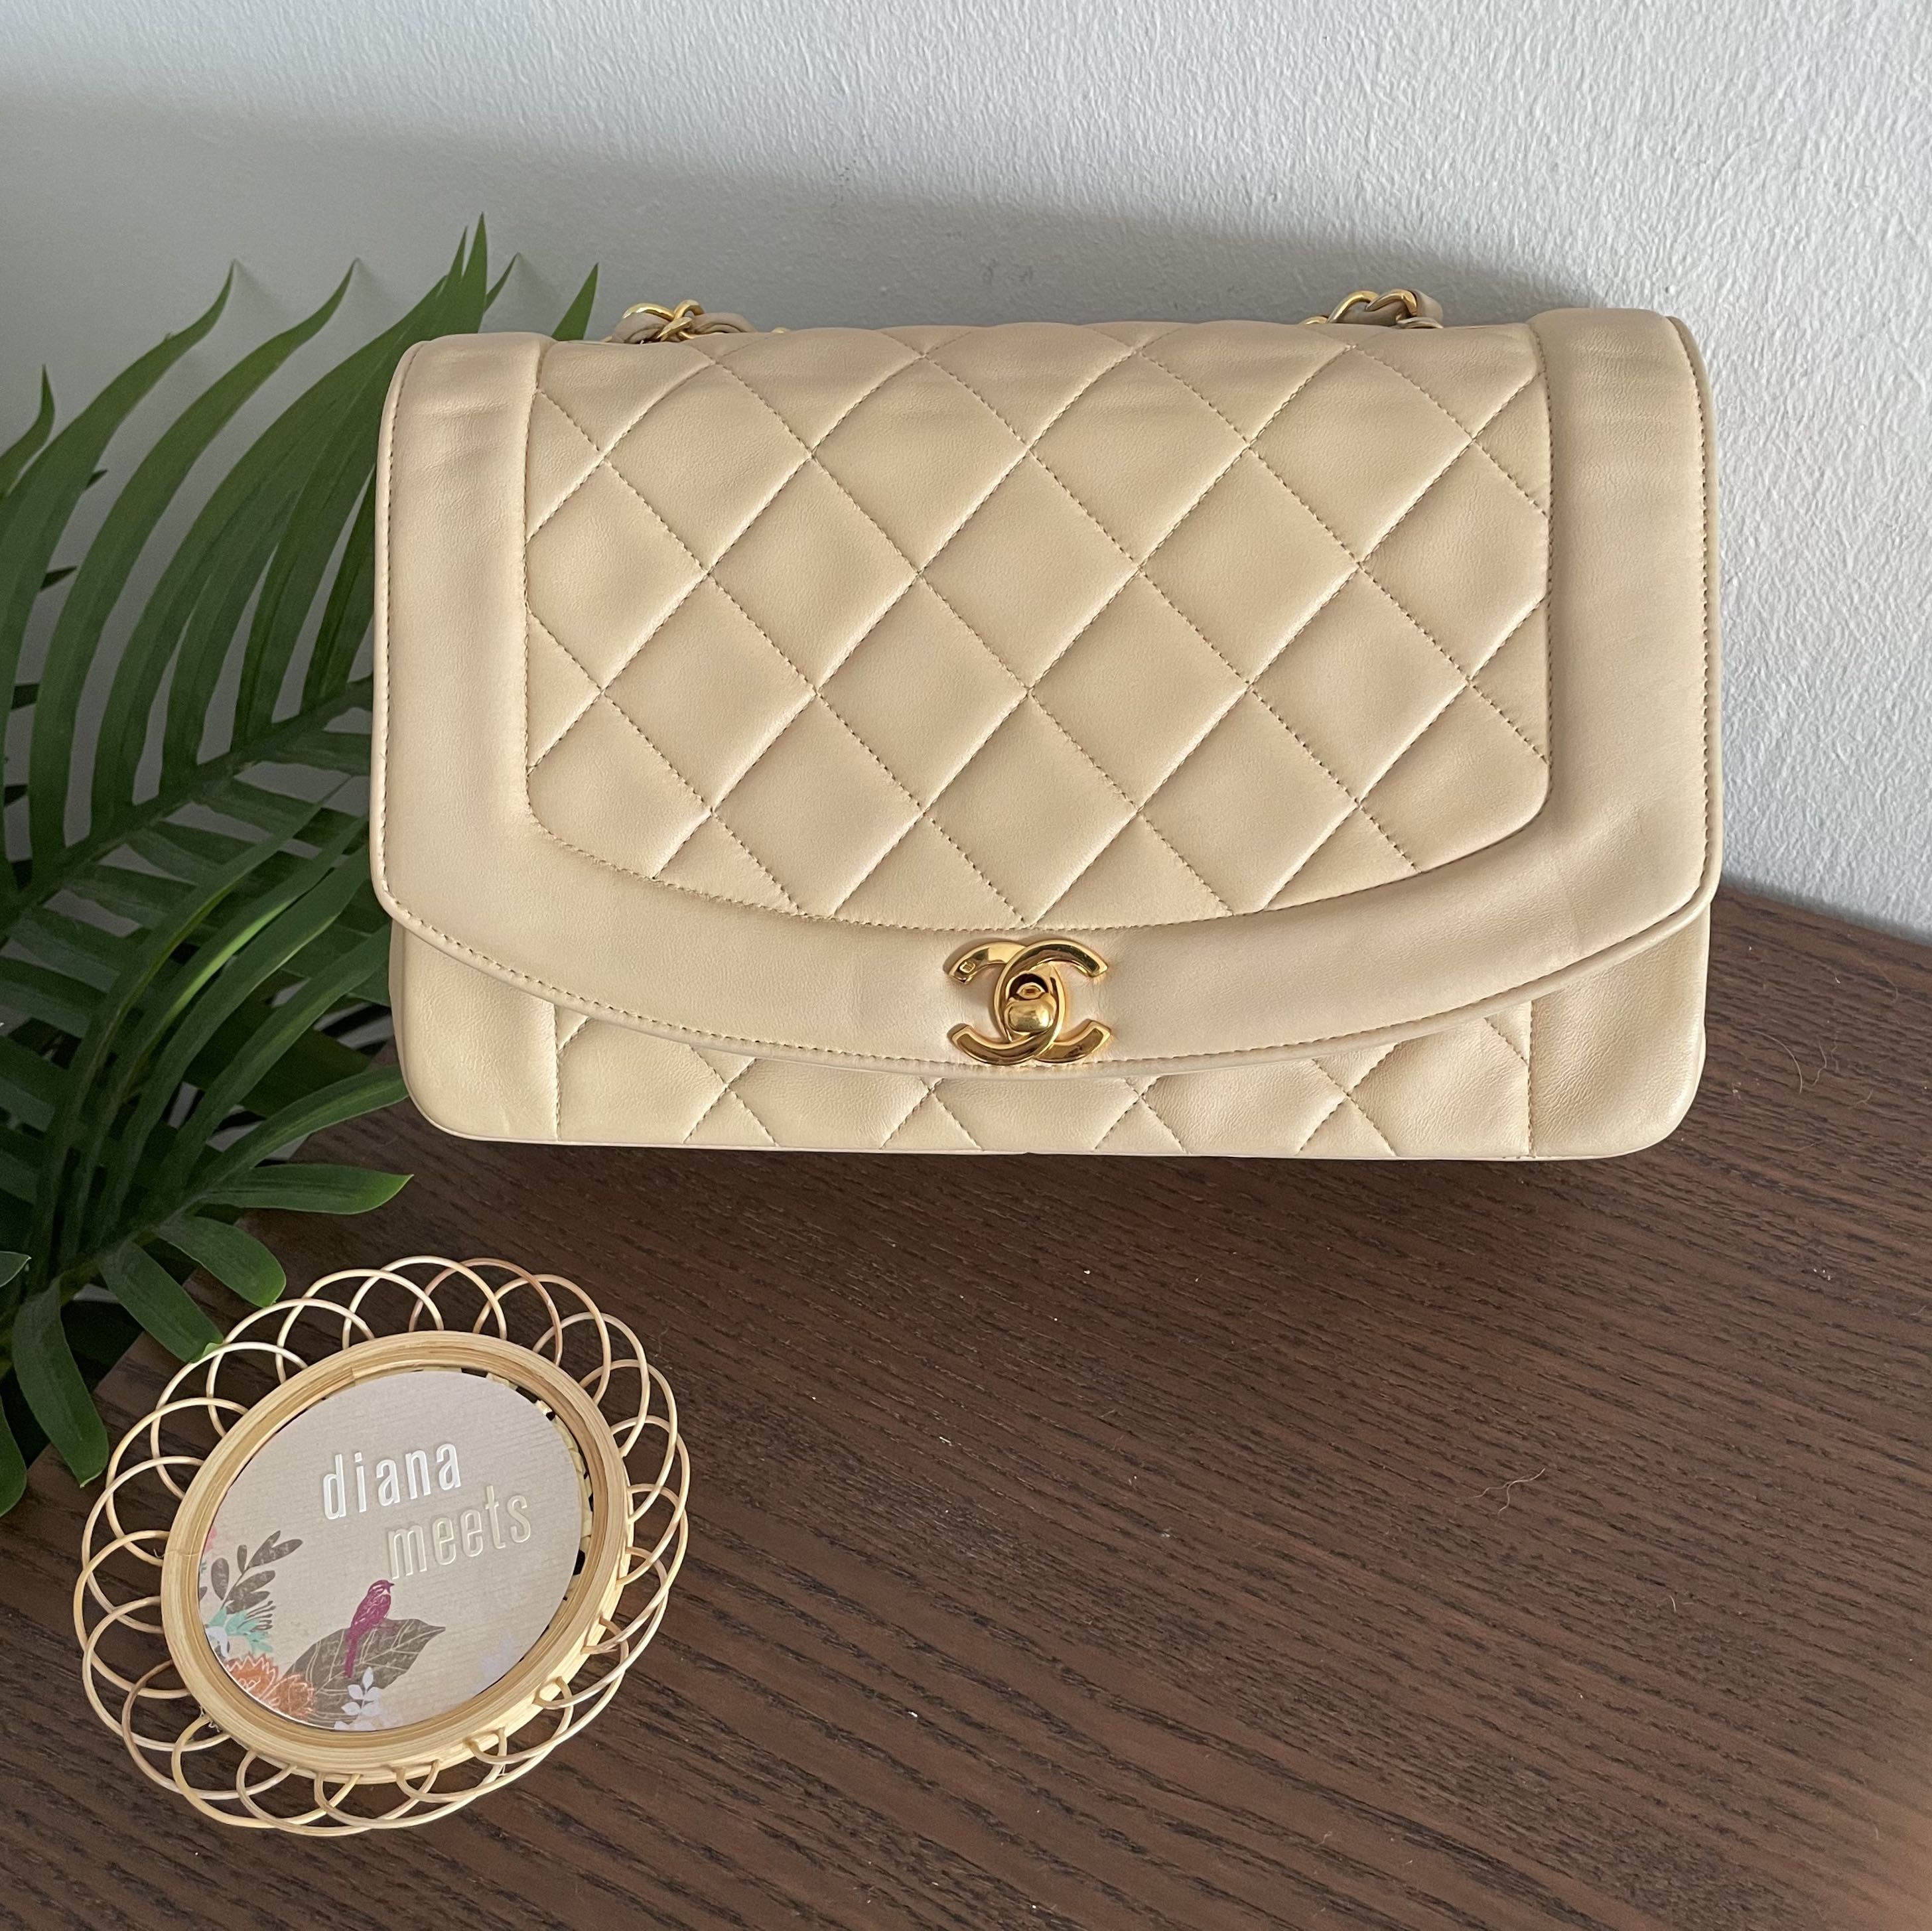 Diana leather crossbody bag Chanel Beige in Leather - 39051410